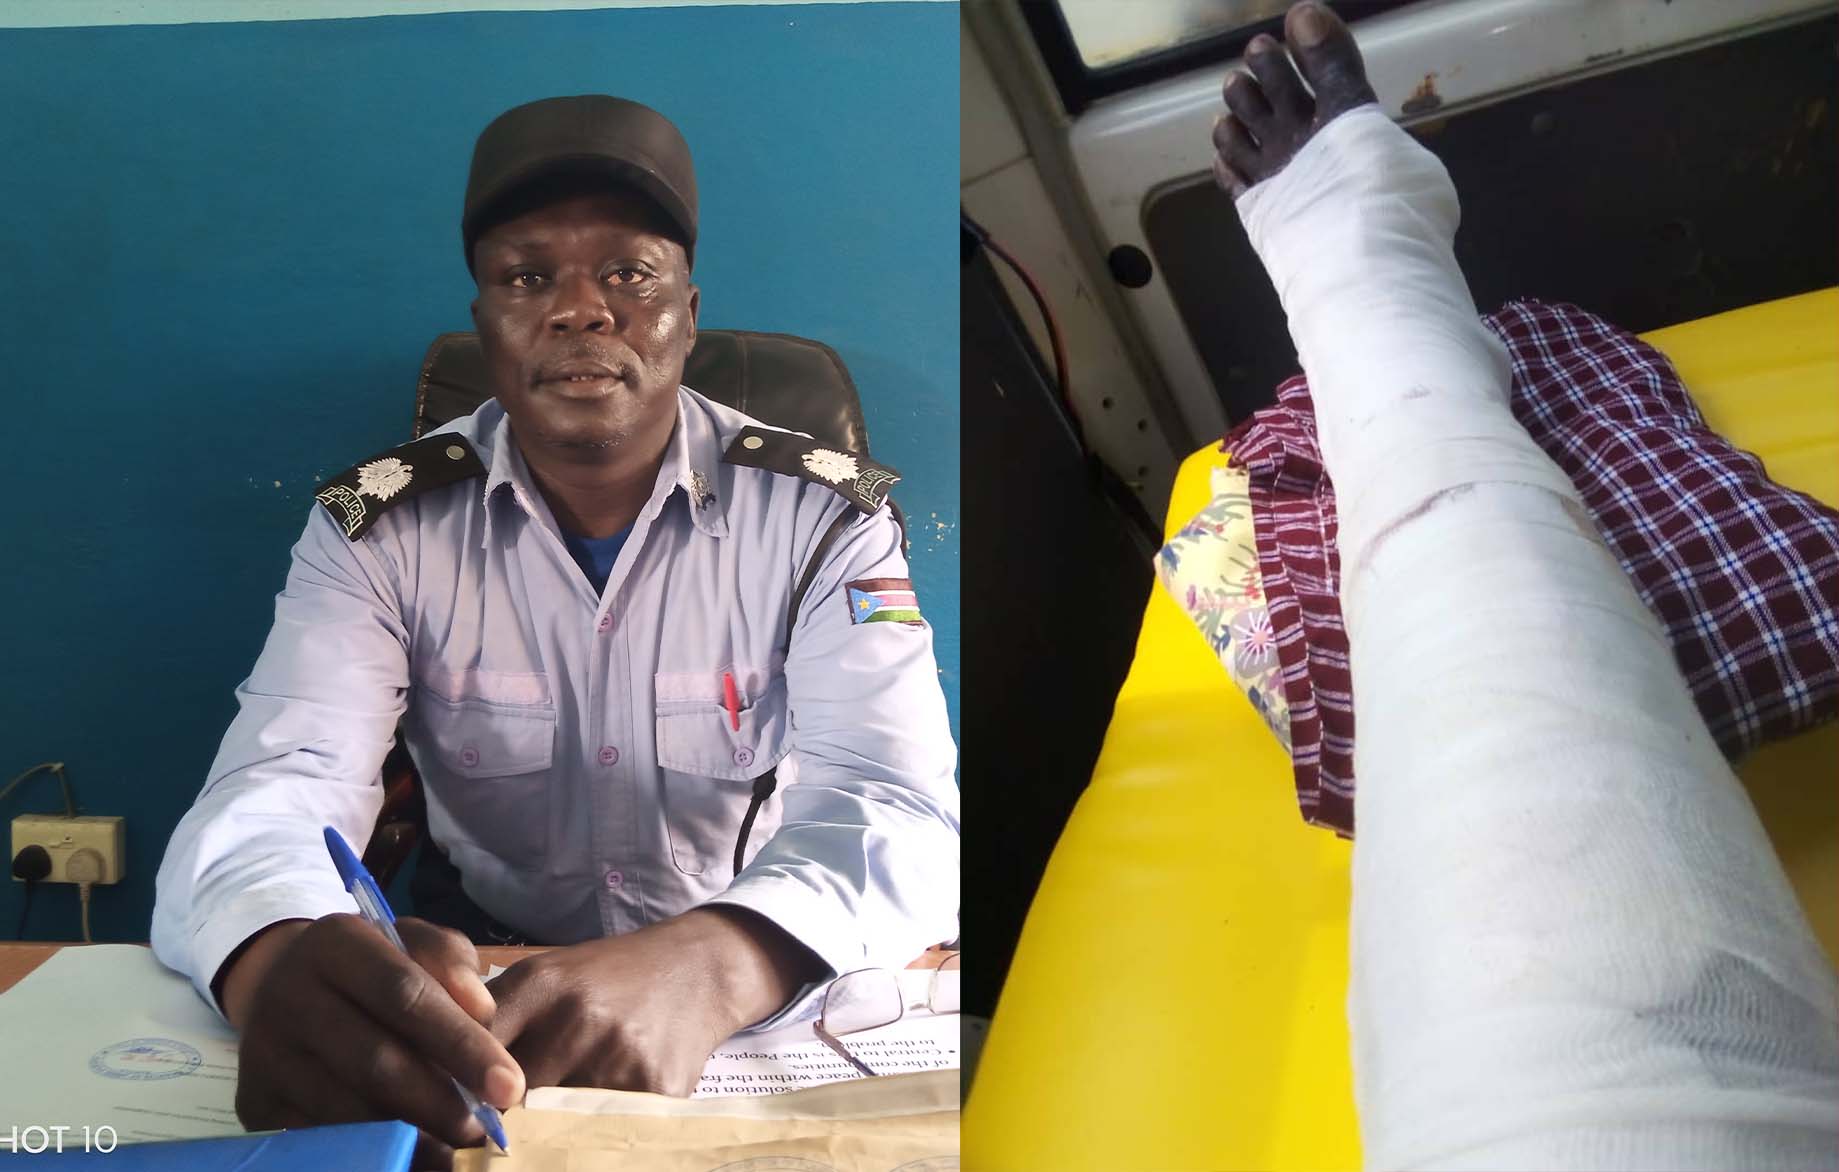 Nimule Police Inspector shot in leg amidst protest